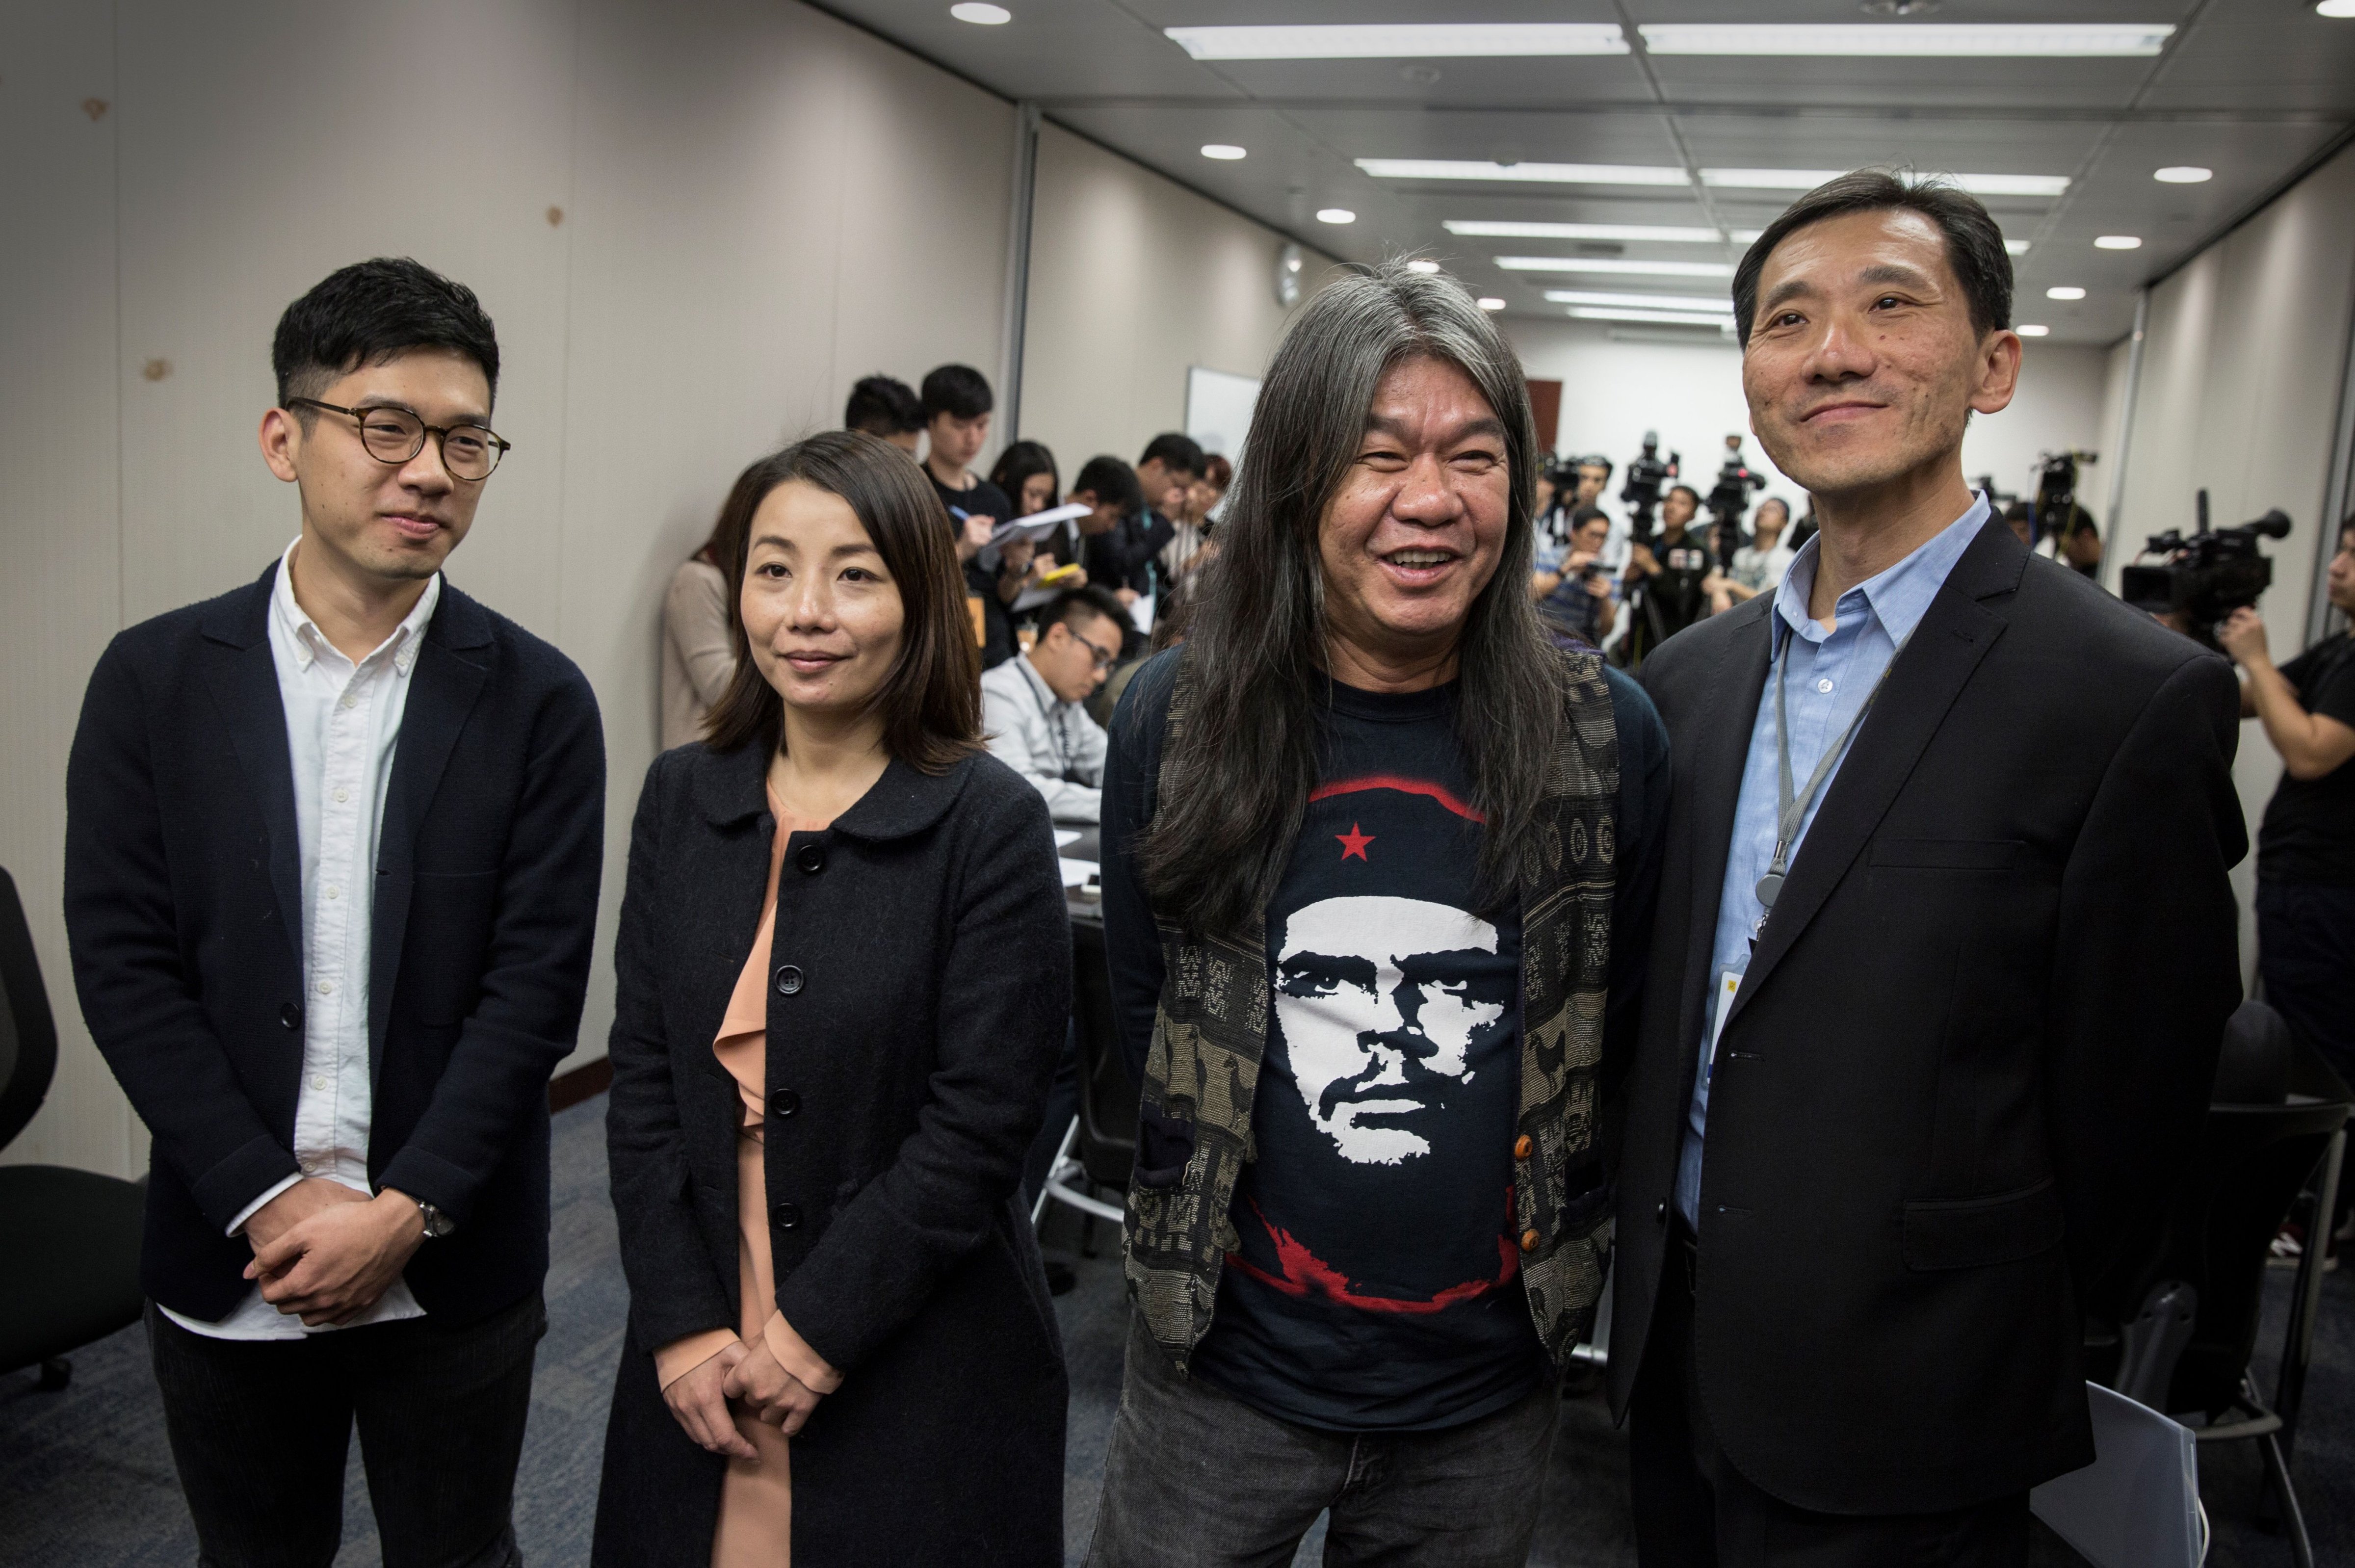 This Dec. 22, 2016 phoyo shows Hong Kong Legislative Council members Nathan Law (L), Lau Siu-lai (2nd L), Leung Kwok-hung (2nd R) and Edward Yiu (R) at a press conference addressing the judicial review brought by the government over each of their oath-taking. (Isaac Lawrence—AFP/Getty Images)